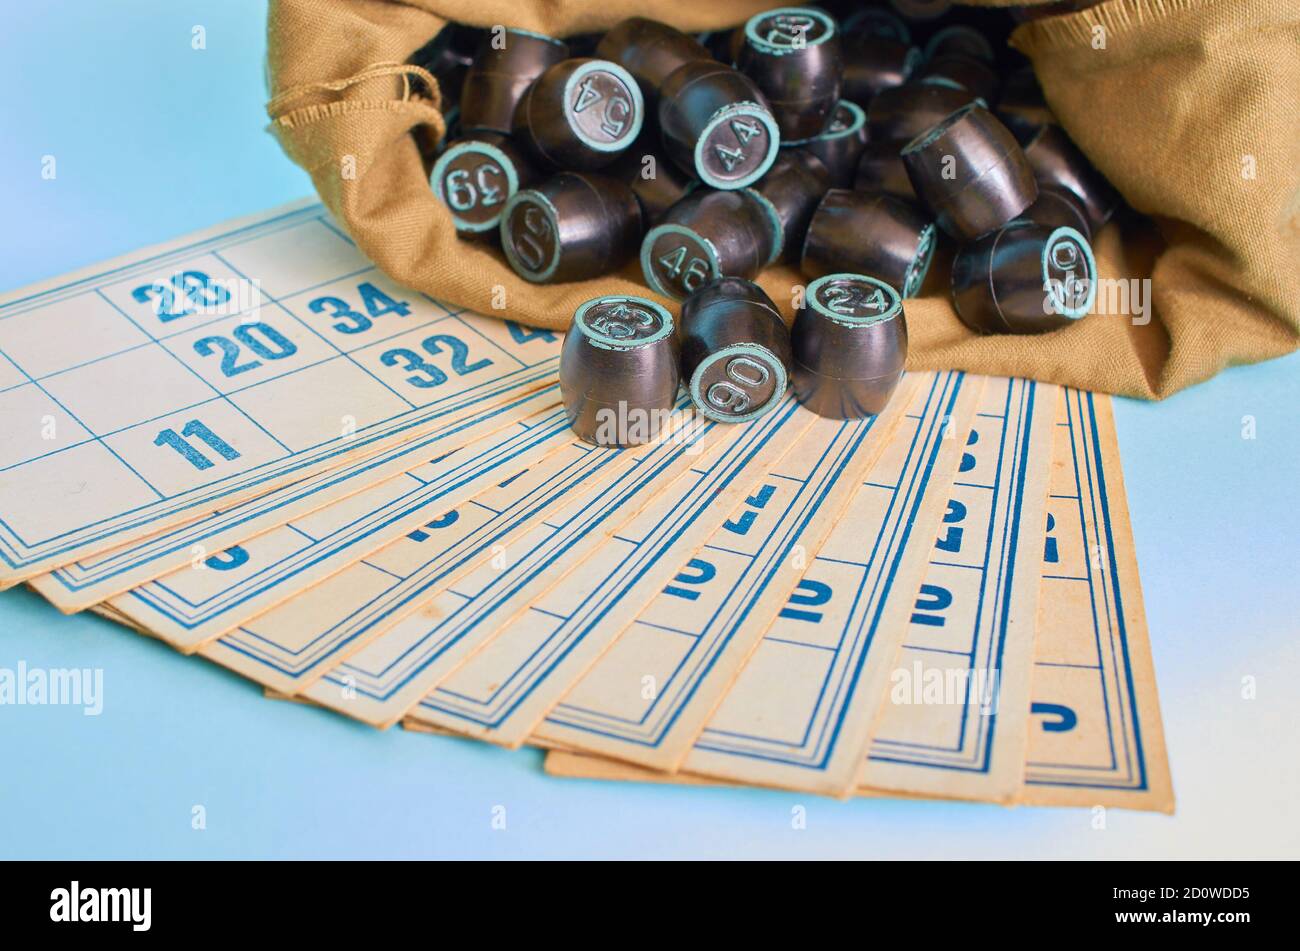 A bag with barrels and cards of the Board game Lotto close up Stock Photo